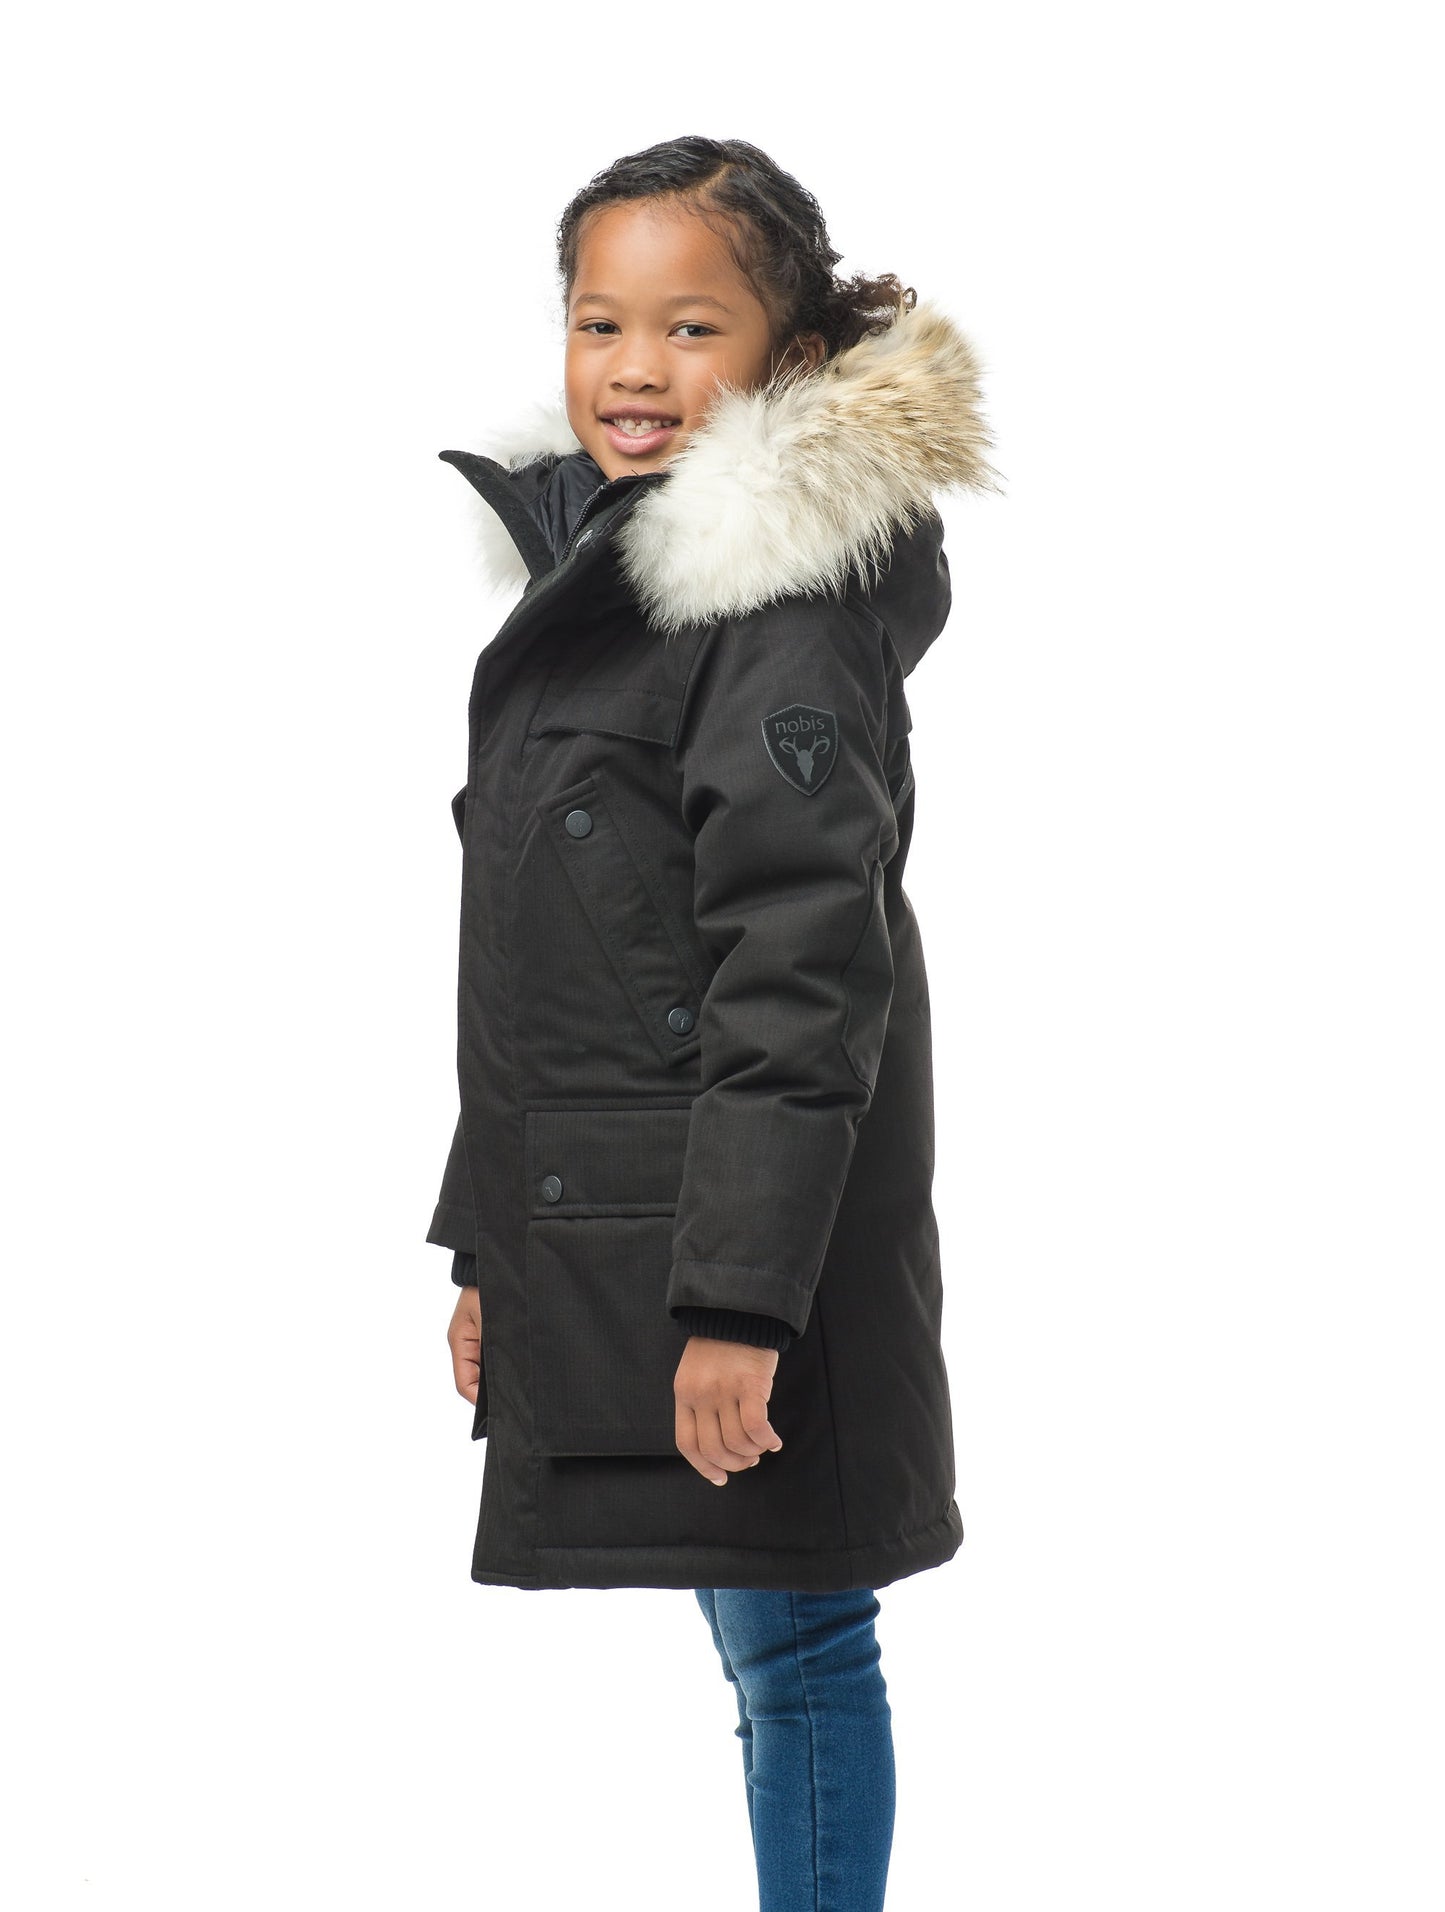 The best kid's down filled parka that's machine washable, waterproof, windproof and breathable in CH Black